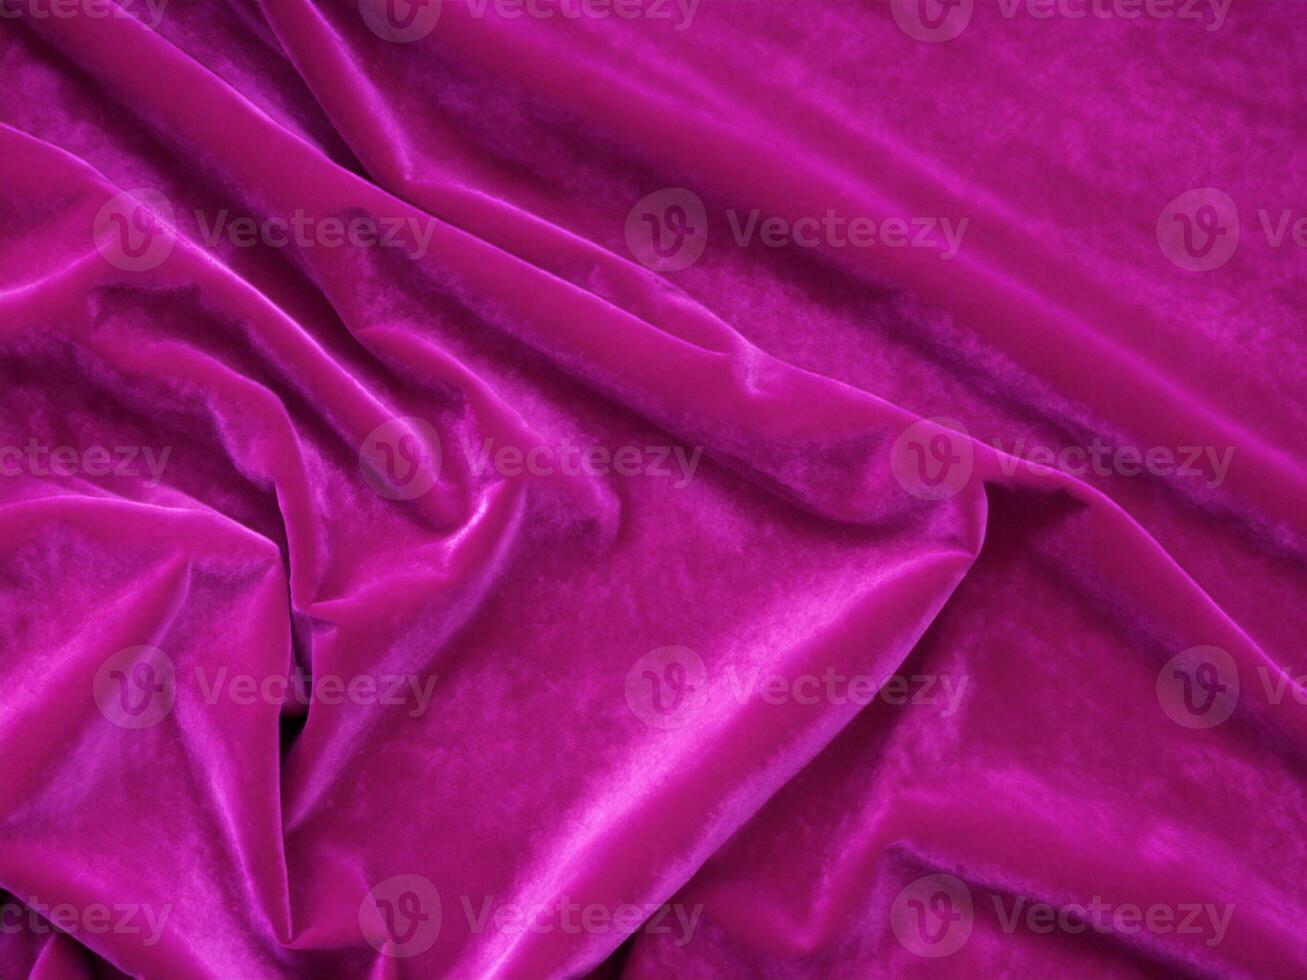 texture background pattern, red silk fabric fabric with subtle organza photo